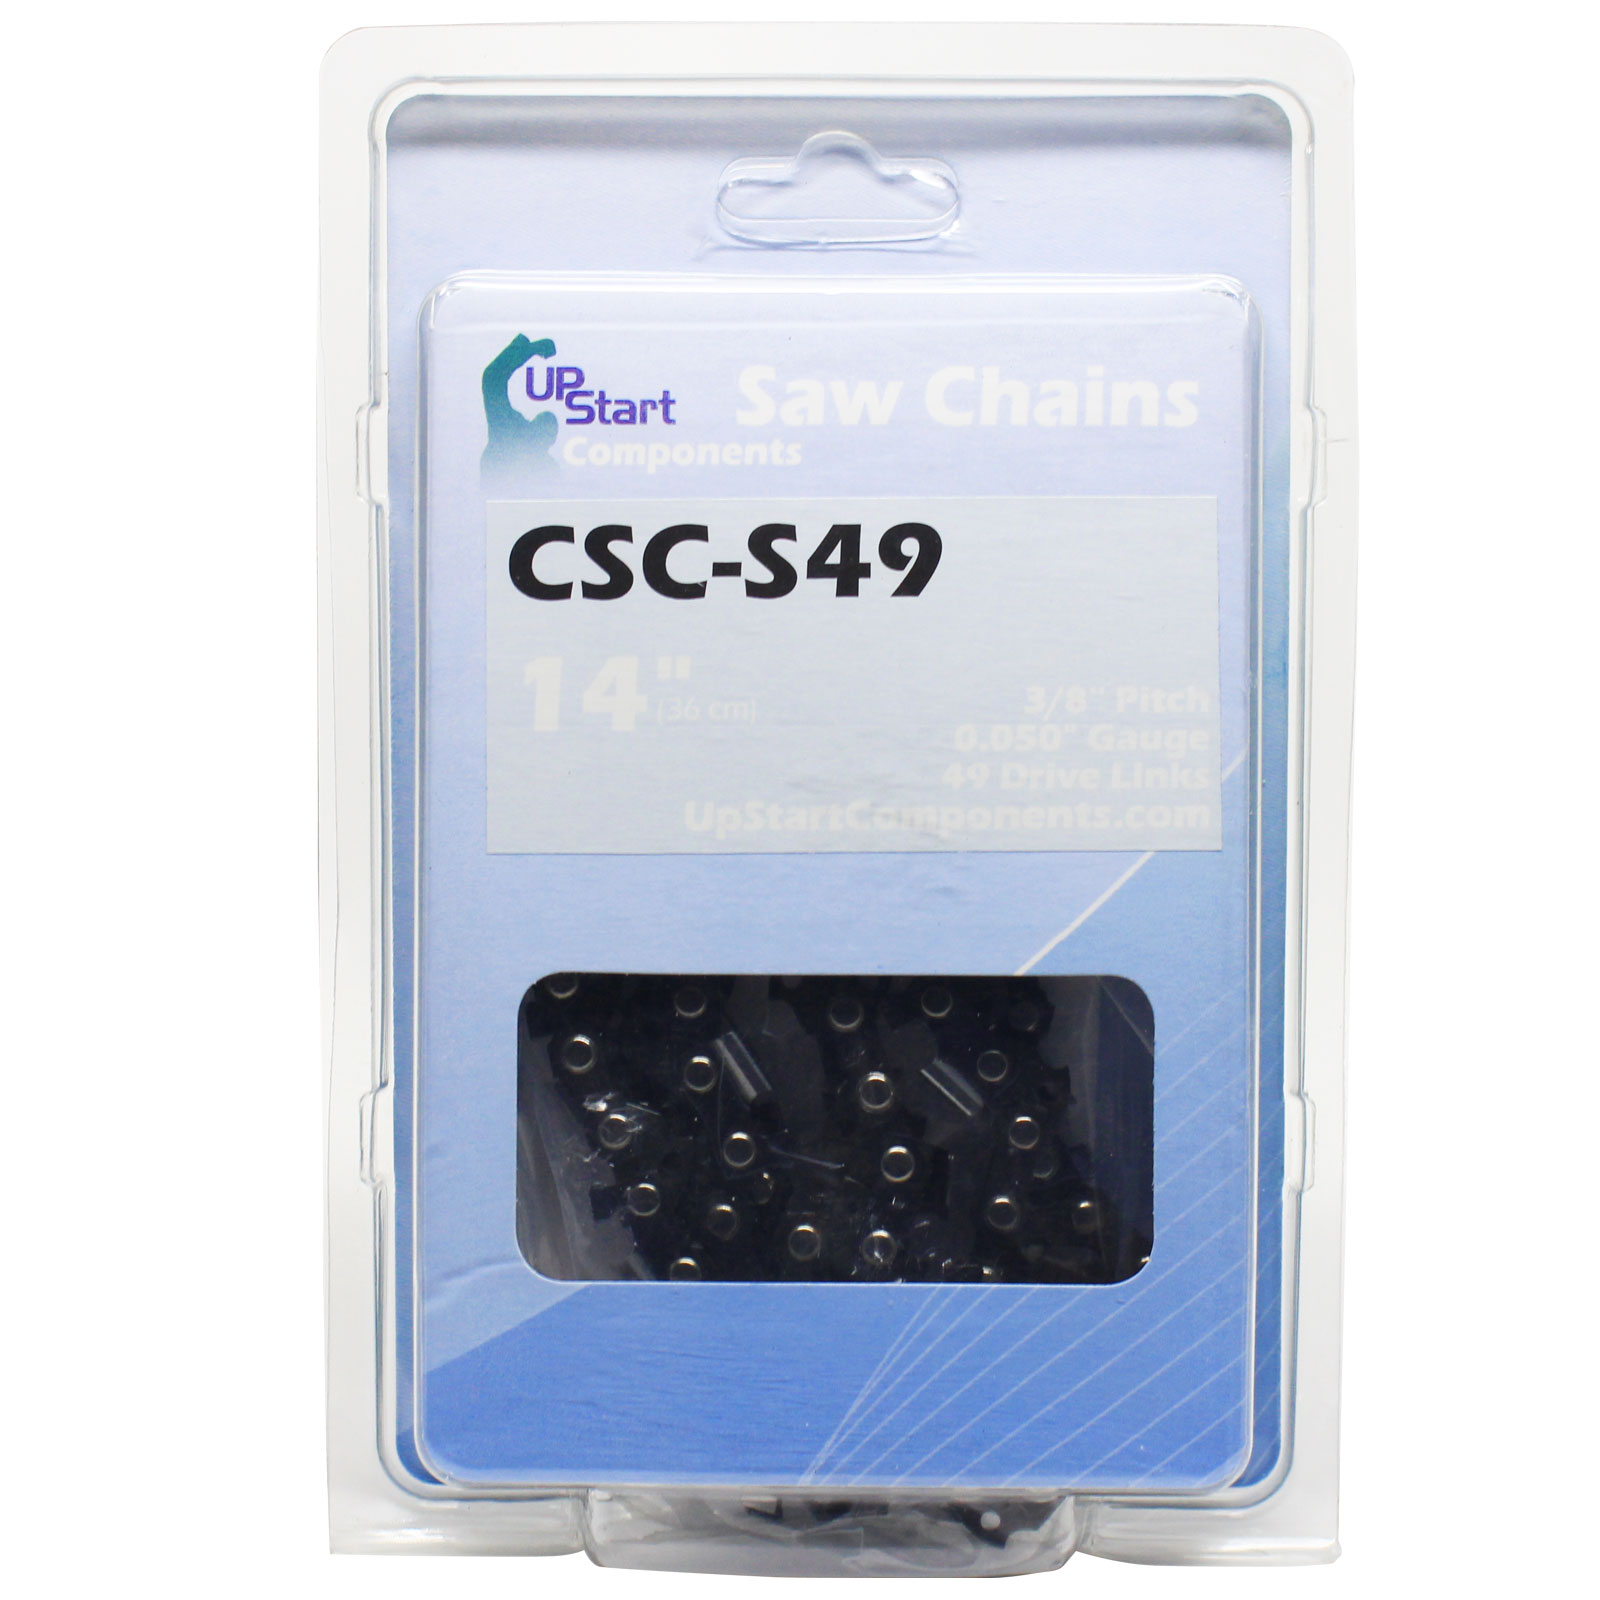 UpStart Components 14" Semi Chisel Saw Chain for McCulloch MS1415 Chainsaws - 14 inch, 3/8" Low Profile Pitch, 0.050" Gauge, 49 Drive Links